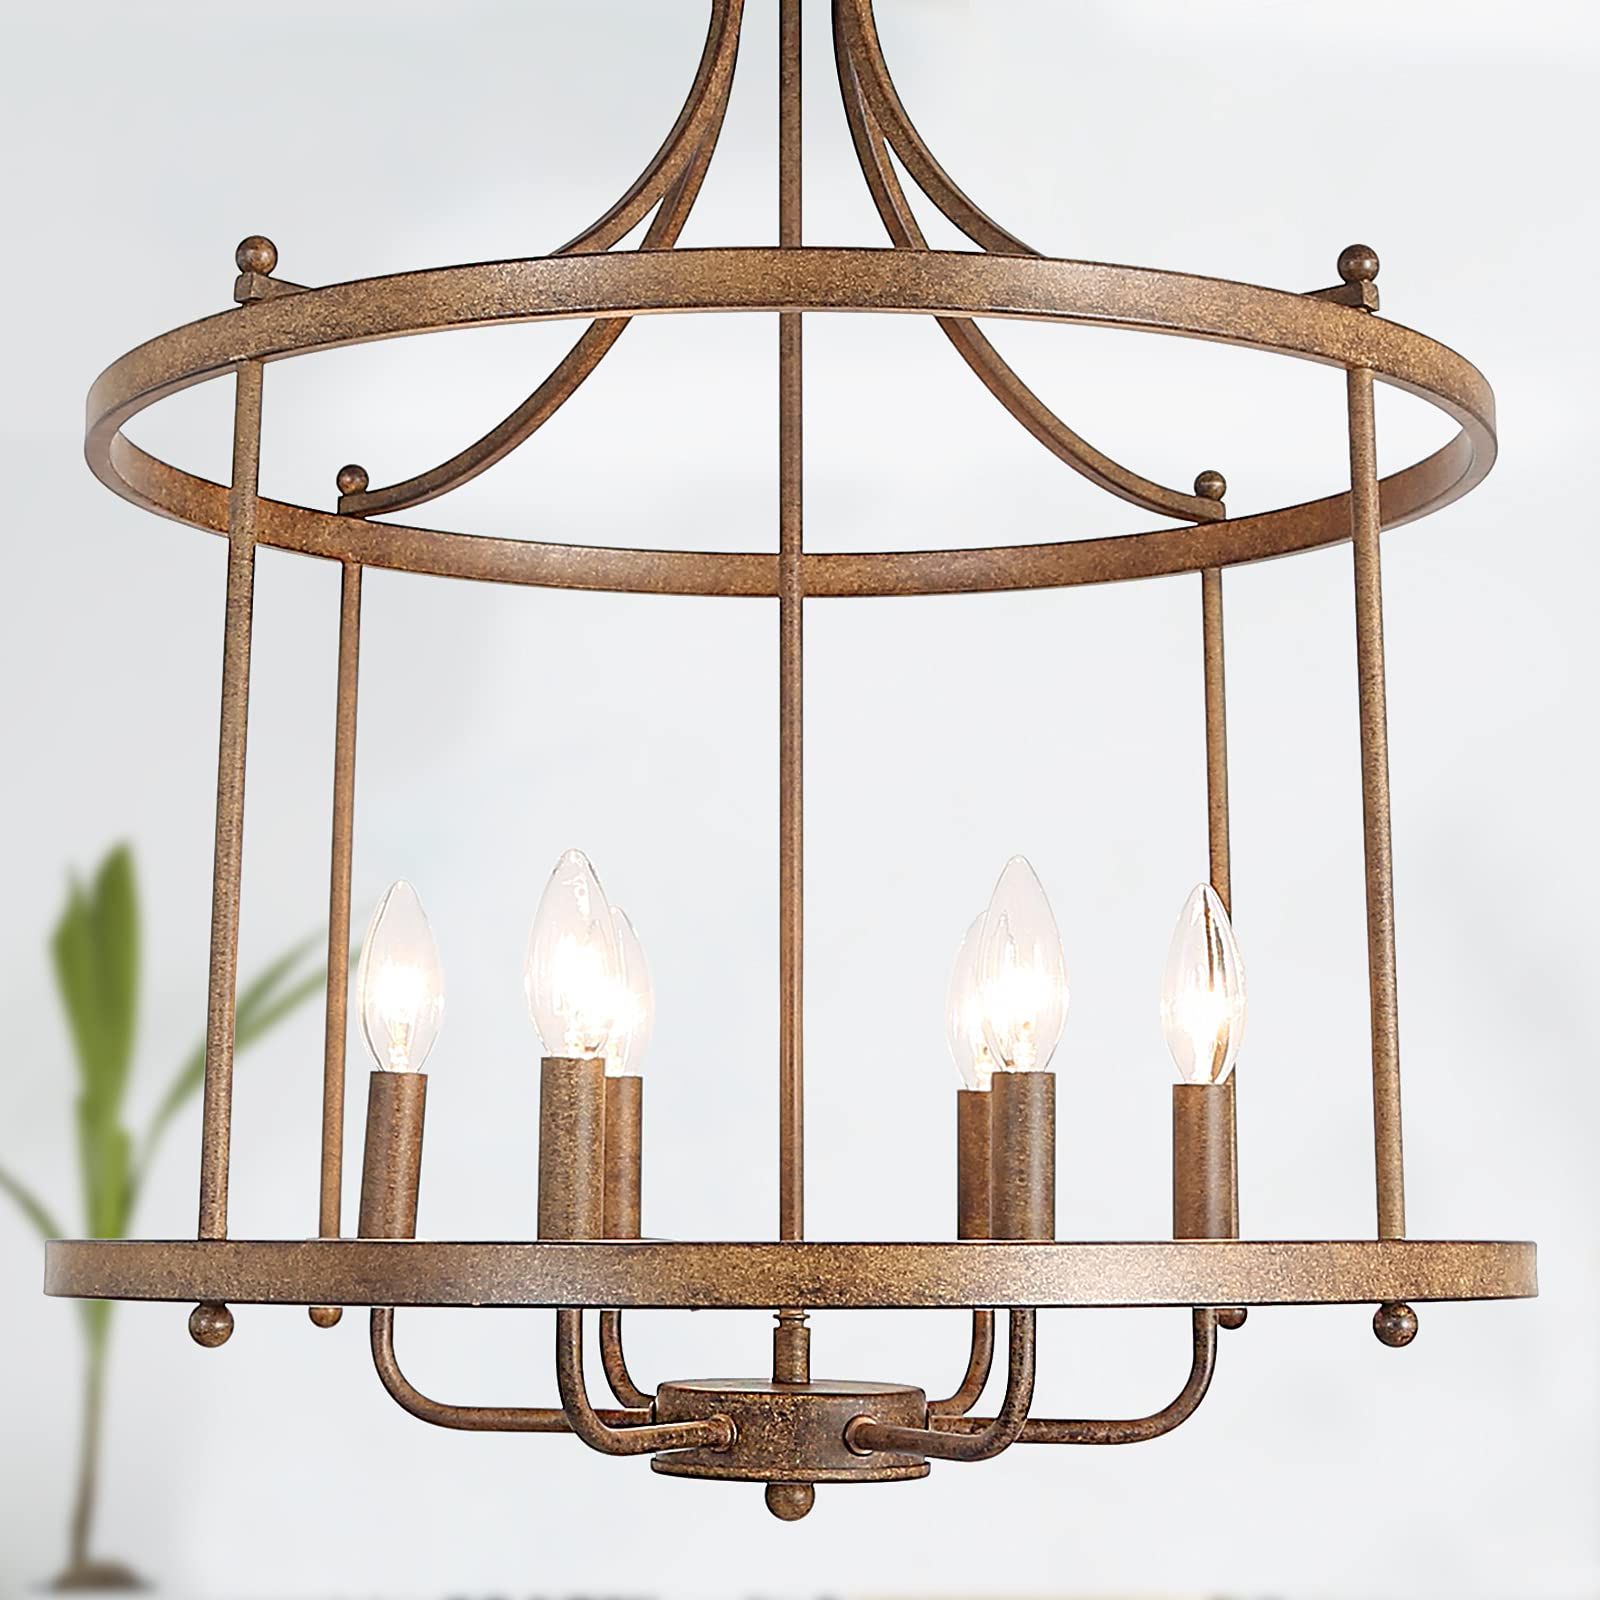 Widely Used Log Barn Farmhouse Chandelier, Dining Lighting Fixtures Hanging In Rustic  Bronze, Drum Pendant For Kitchen Island, Living Room – – Amazon For Bronze Lantern Chandeliers (View 15 of 15)